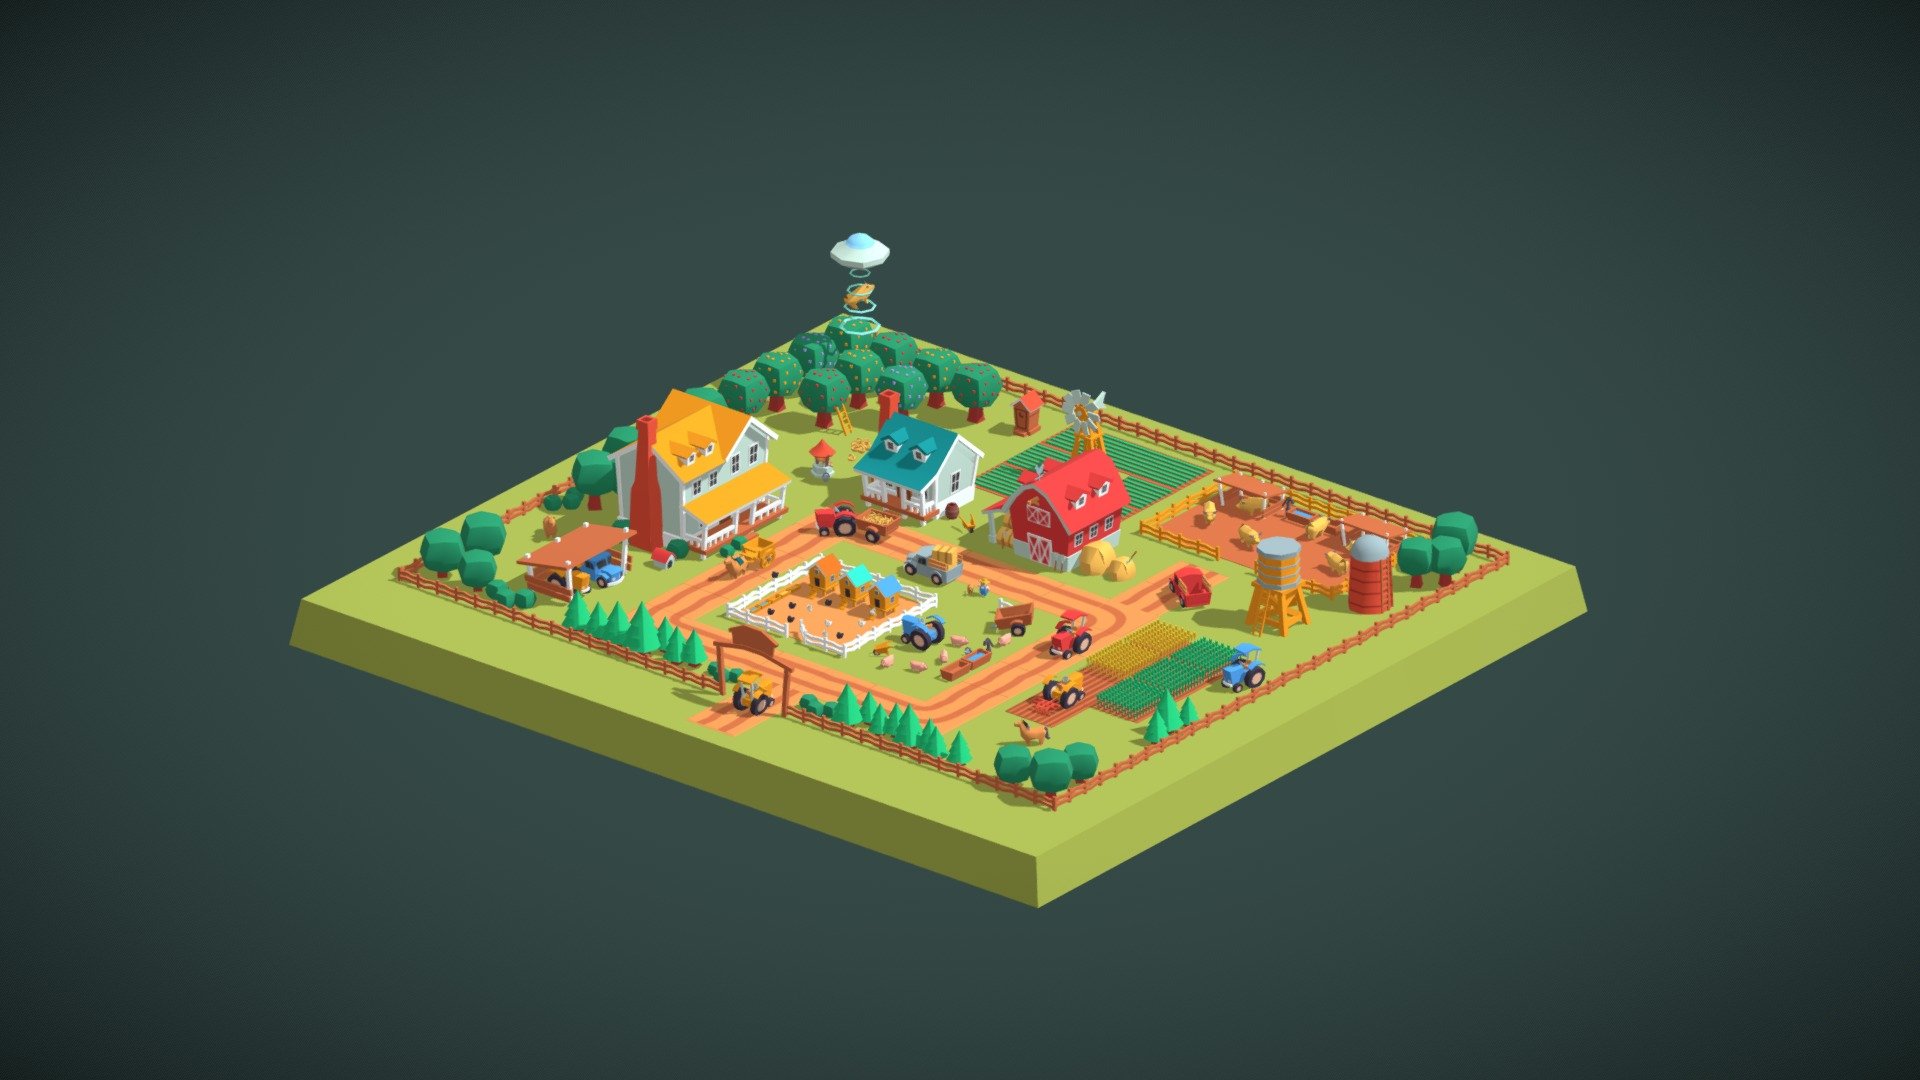 Farm Asset Pack created for Unity 3d model